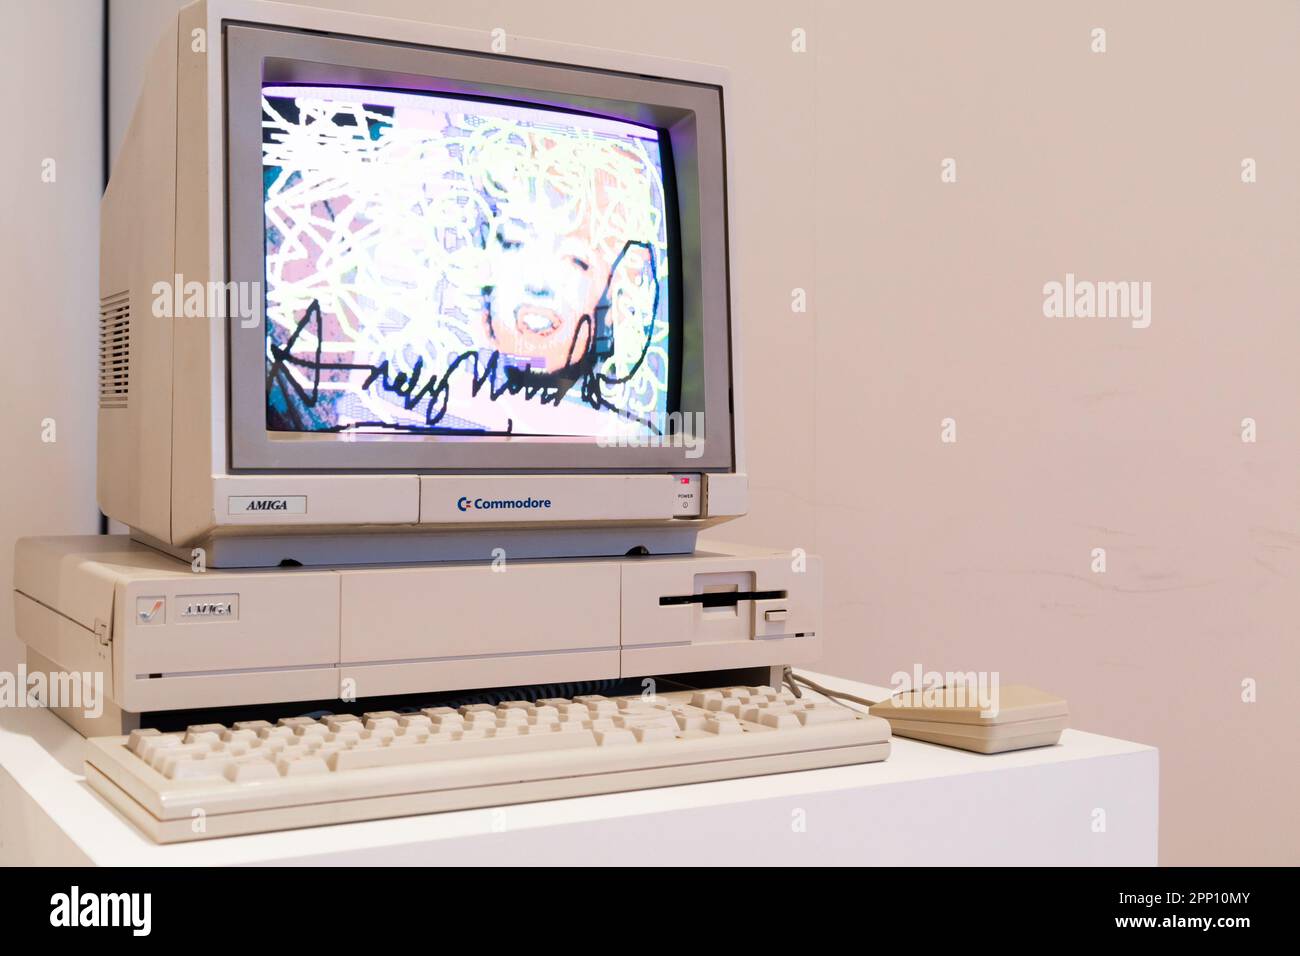 Venaria Reale, Italy - October 2022: Computer Commodore Amiga 1000 with floppy disk, mouse, beige Stock Photo